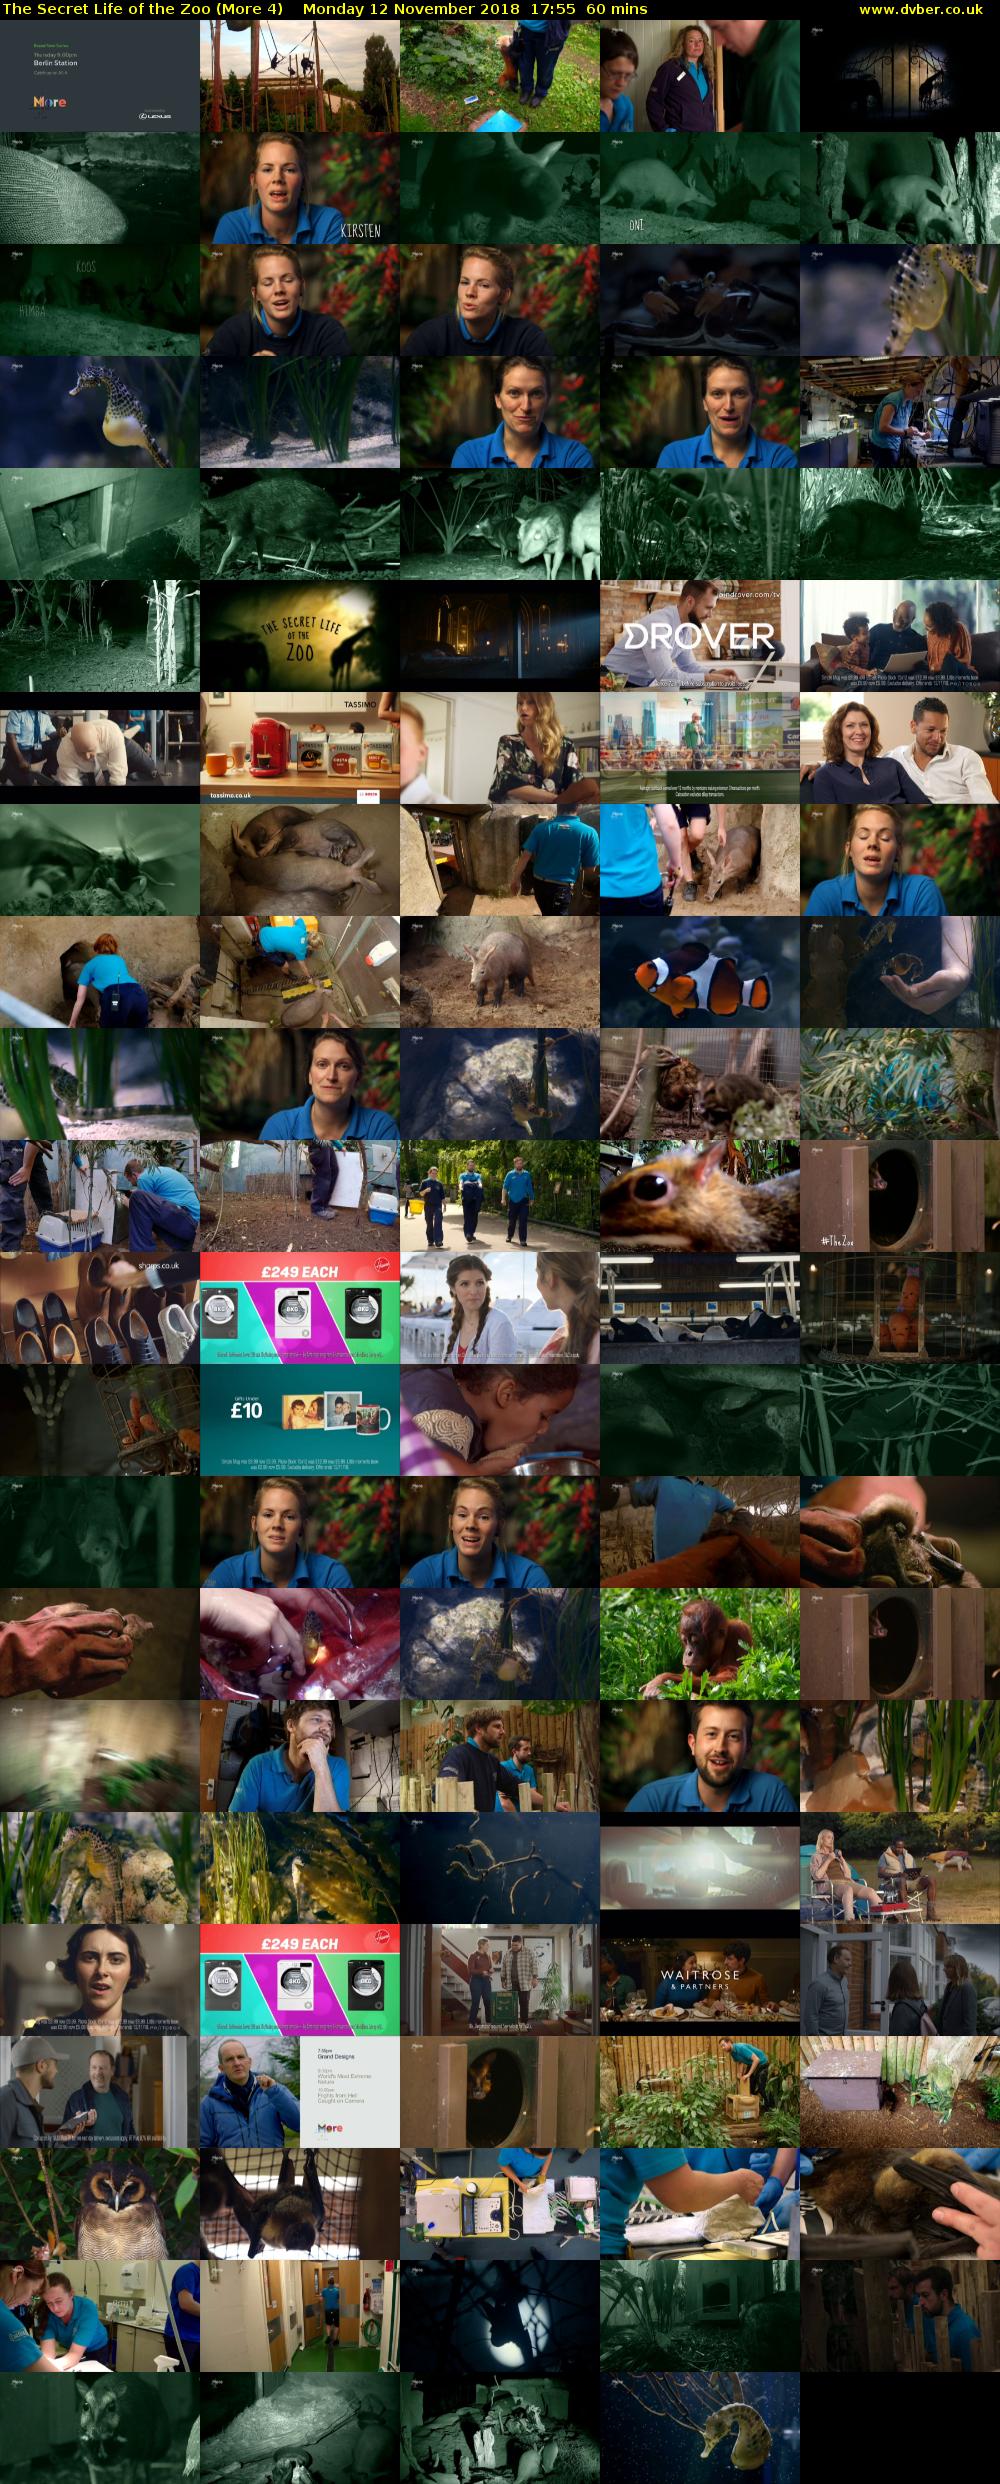 The Secret Life of the Zoo (More 4) Monday 12 November 2018 17:55 - 18:55